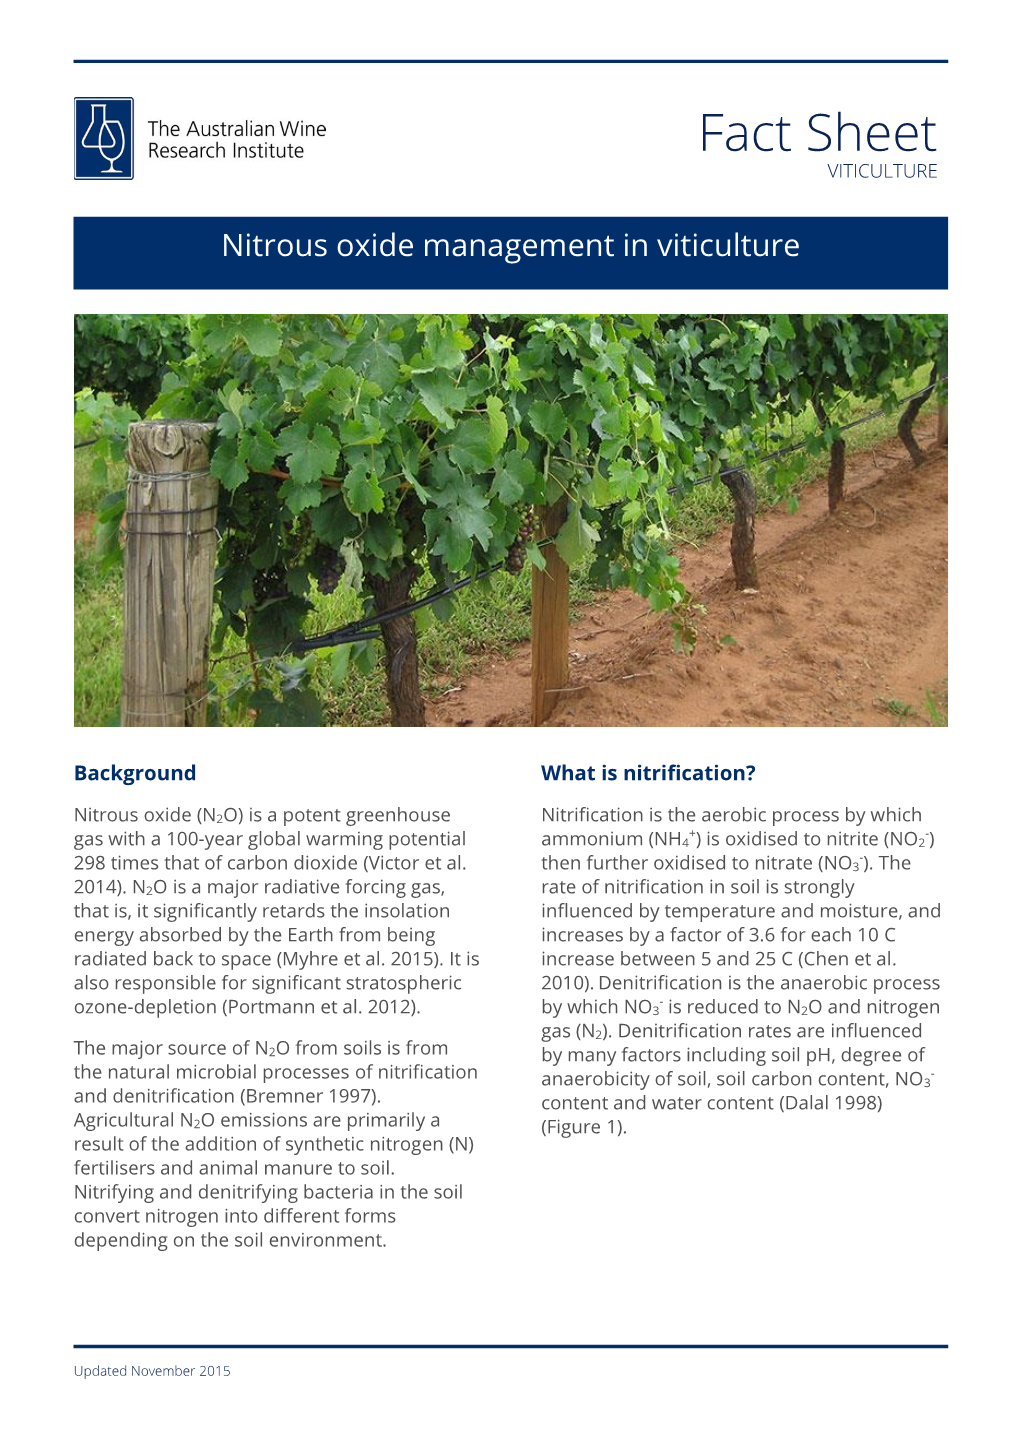 Nitrous Oxide Management in Viticulture Fact Sheet